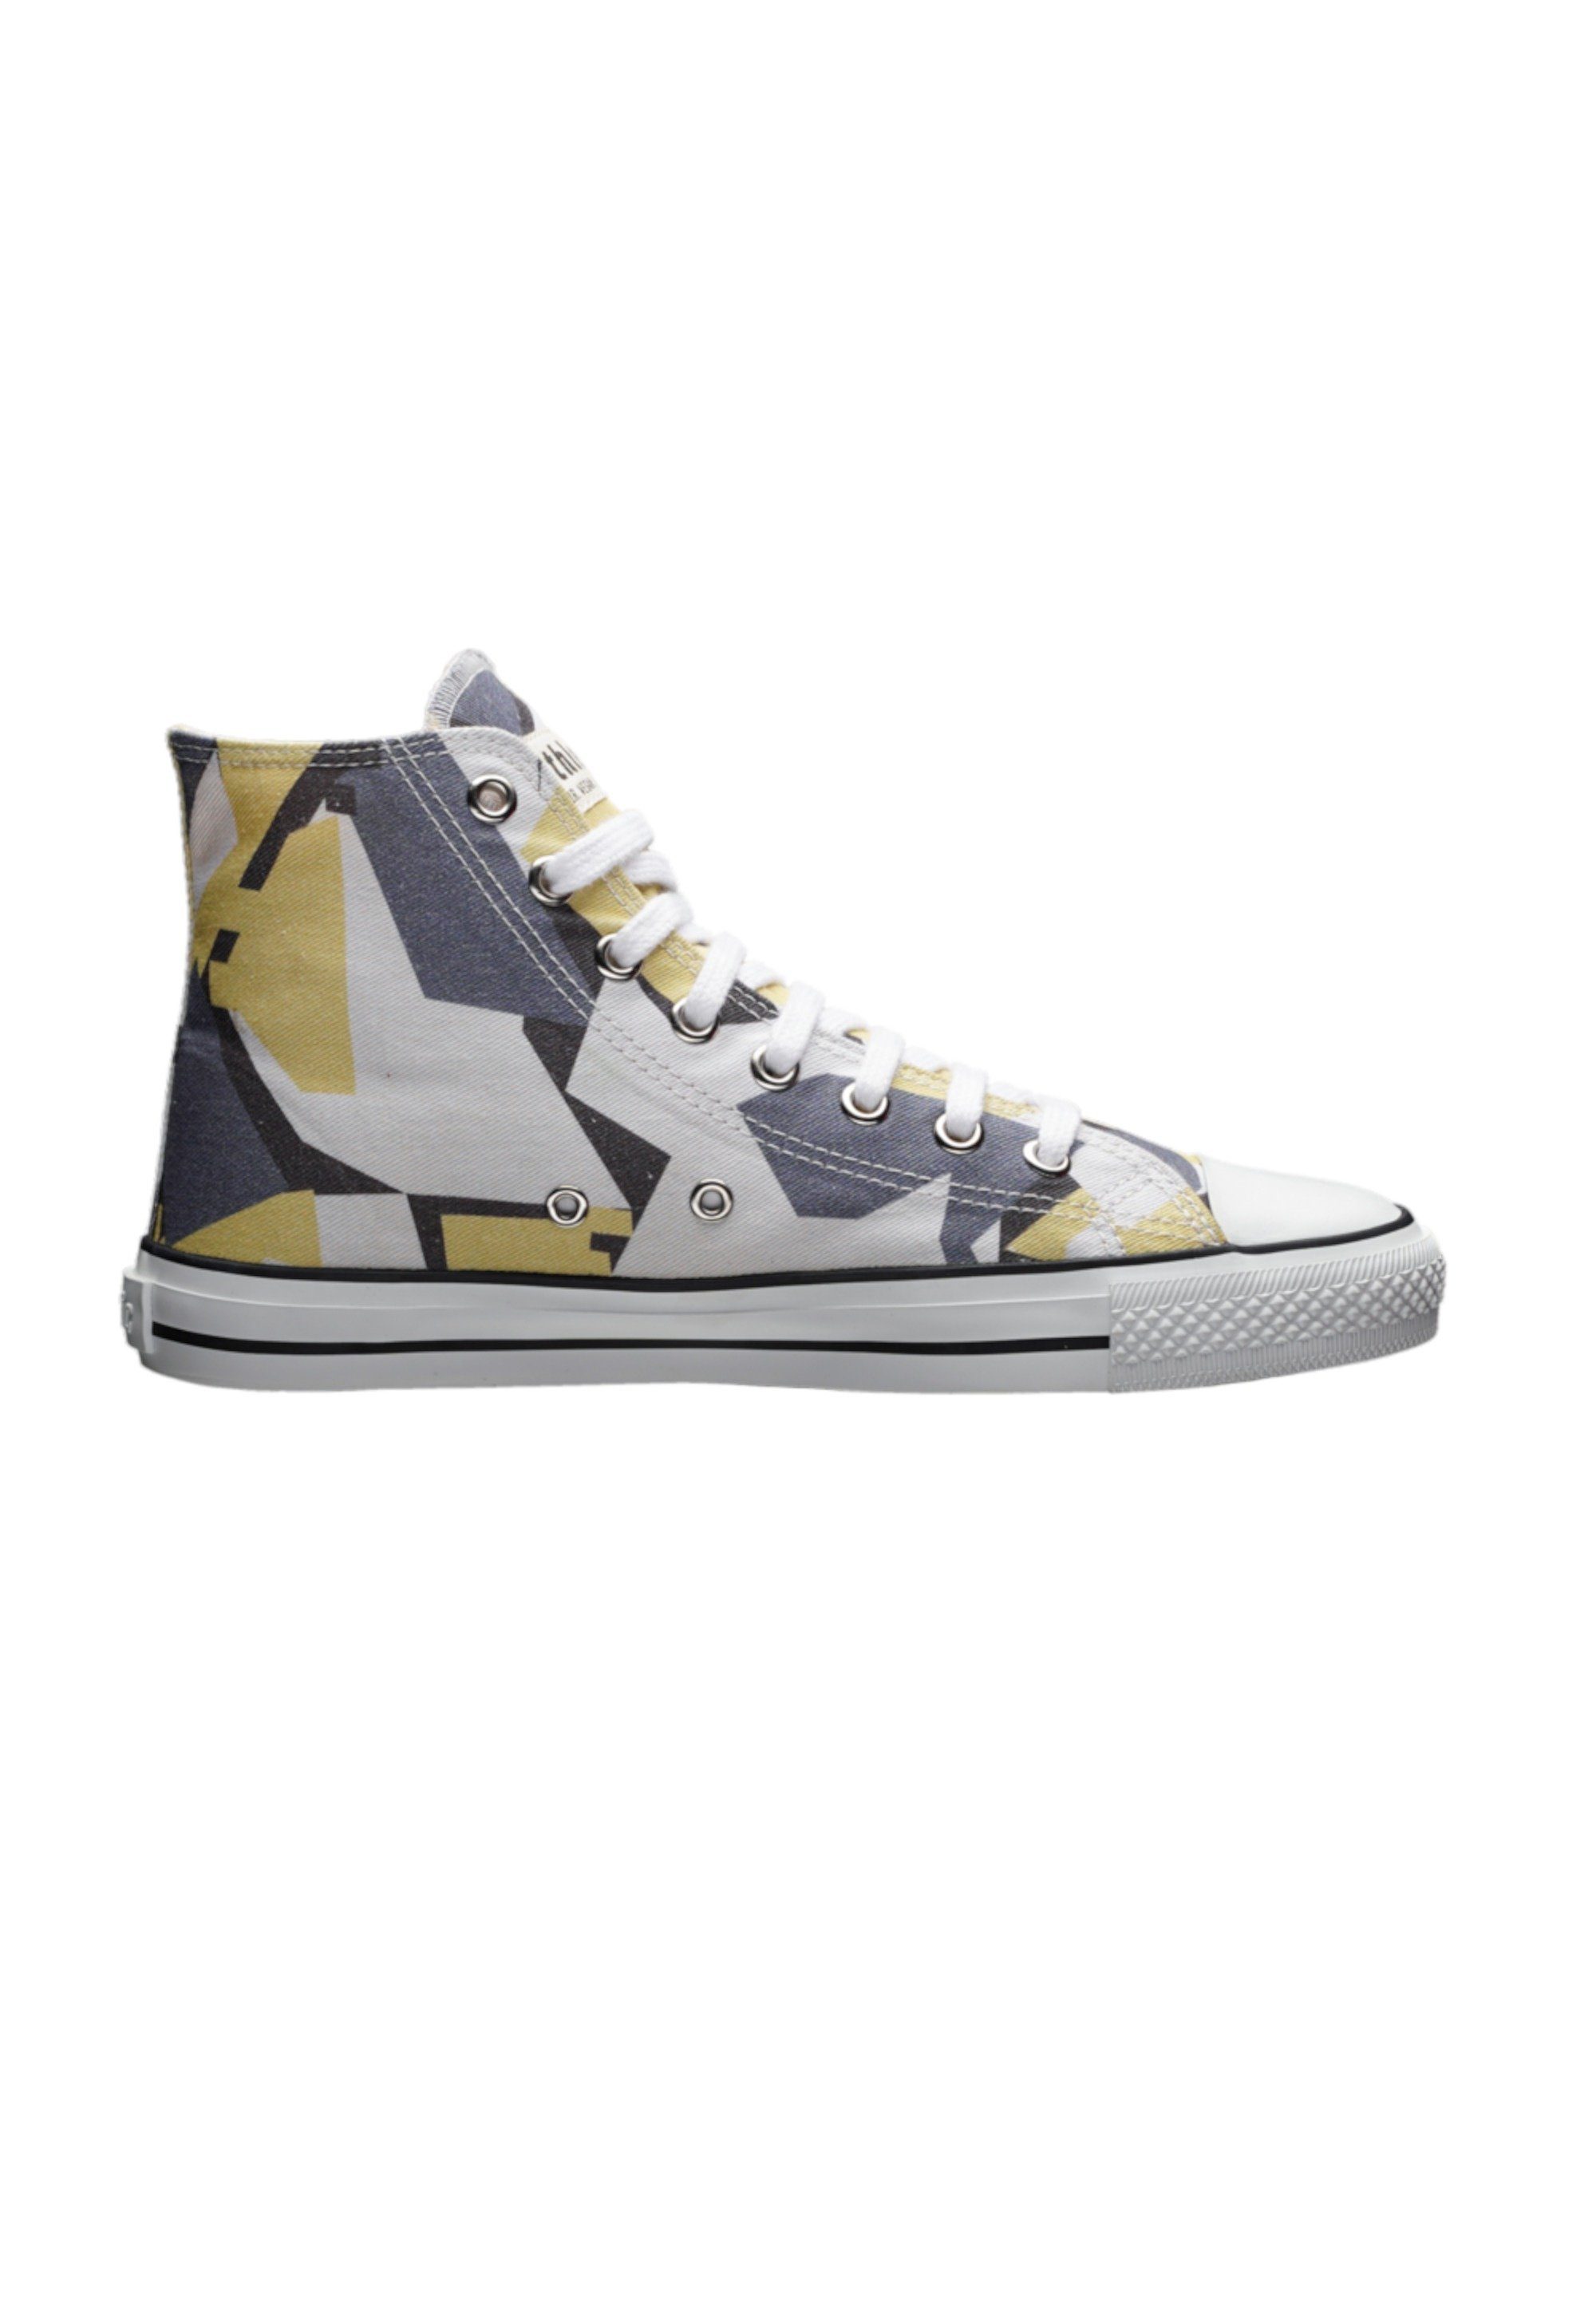 ETHLETIC White Hi Produkt Fairtrade White Yellow Sneaker Cut Just Cap Camou 